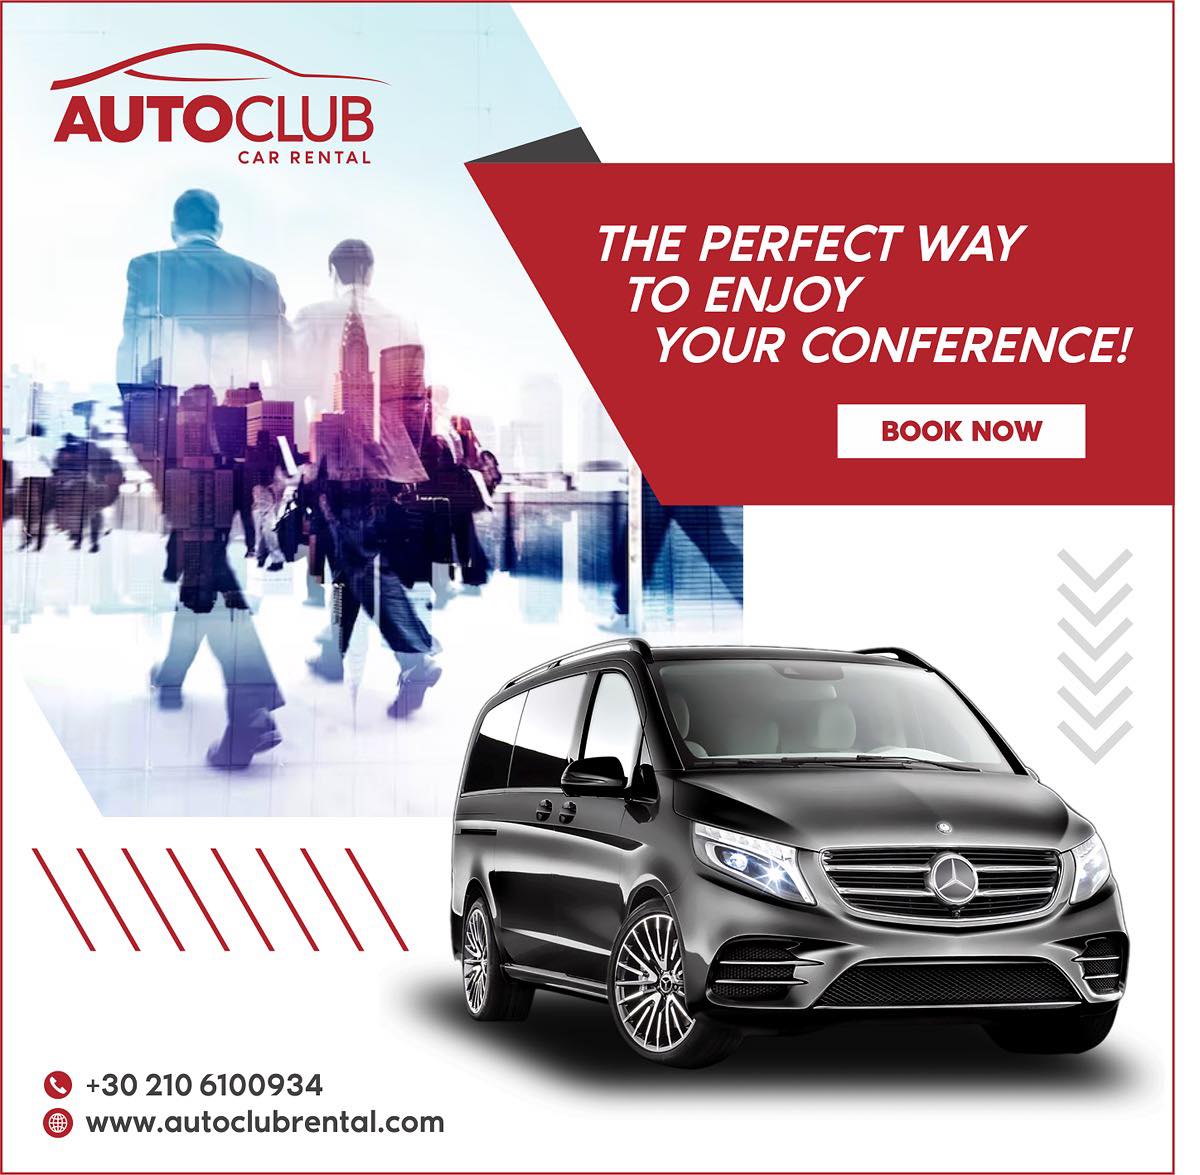 Conference with autoclub services